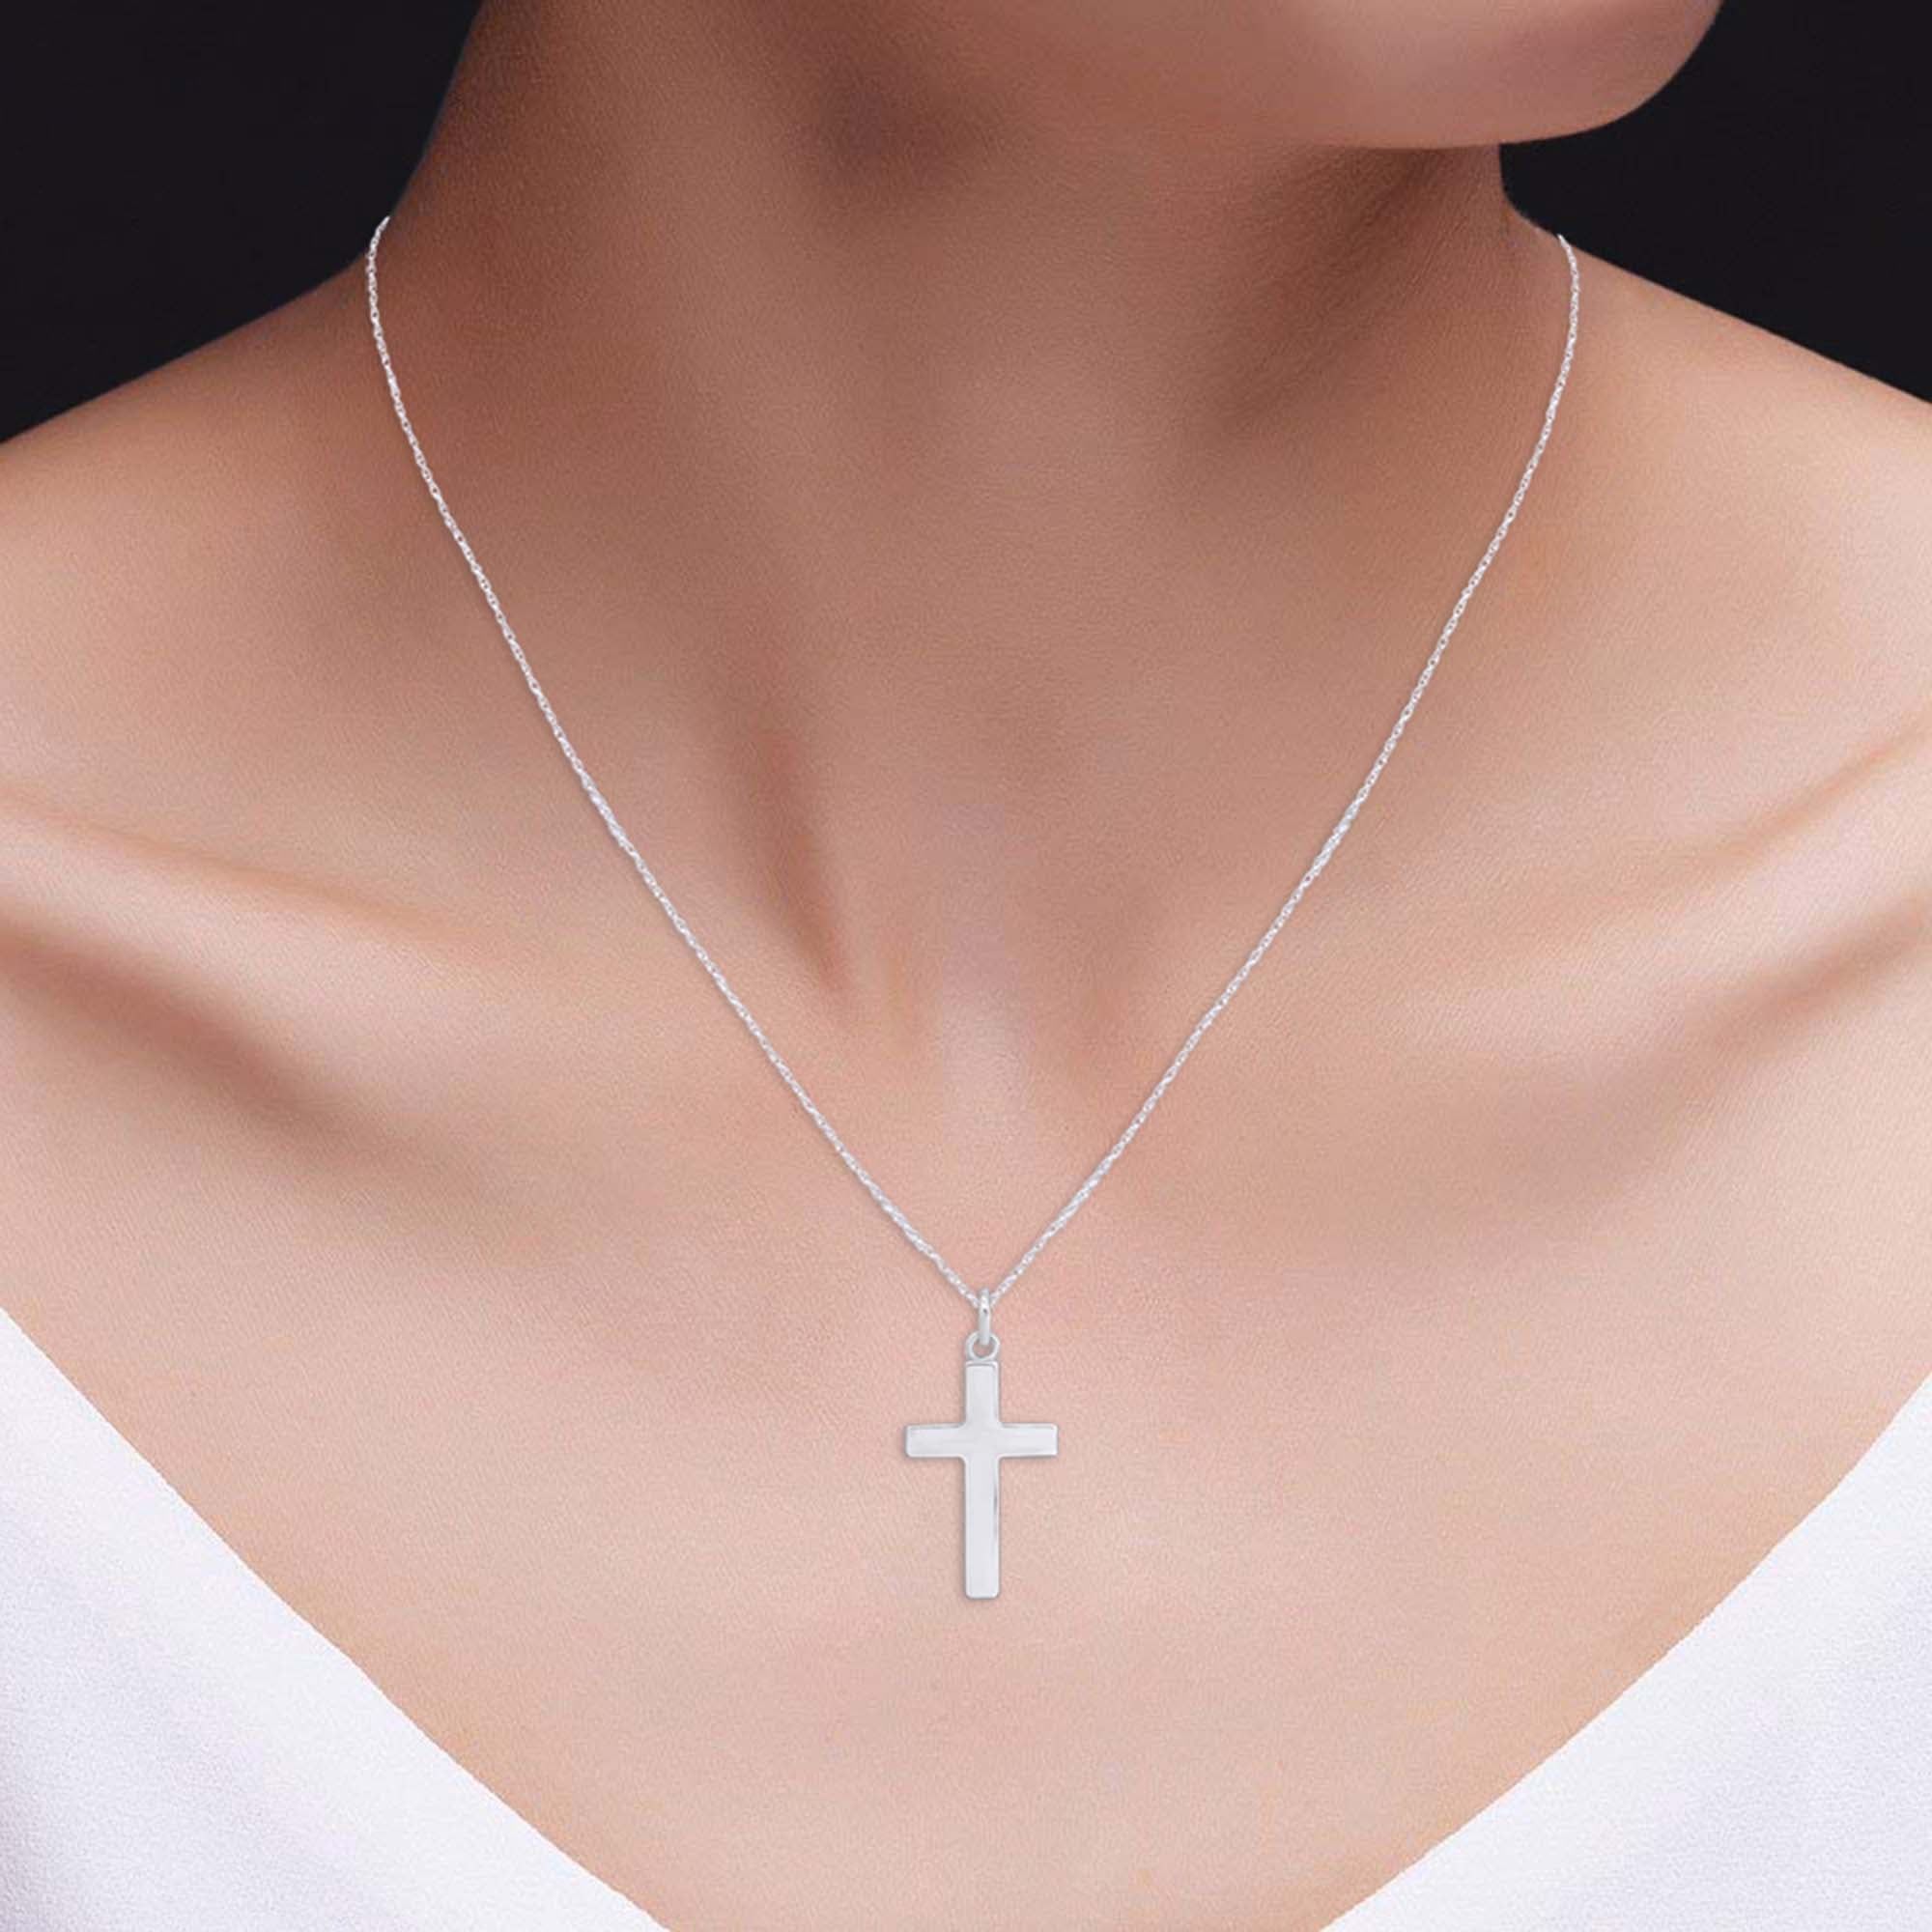 9ct White Gold Polished Plain Cross Pendant (Chain Included) at Fraser Hart